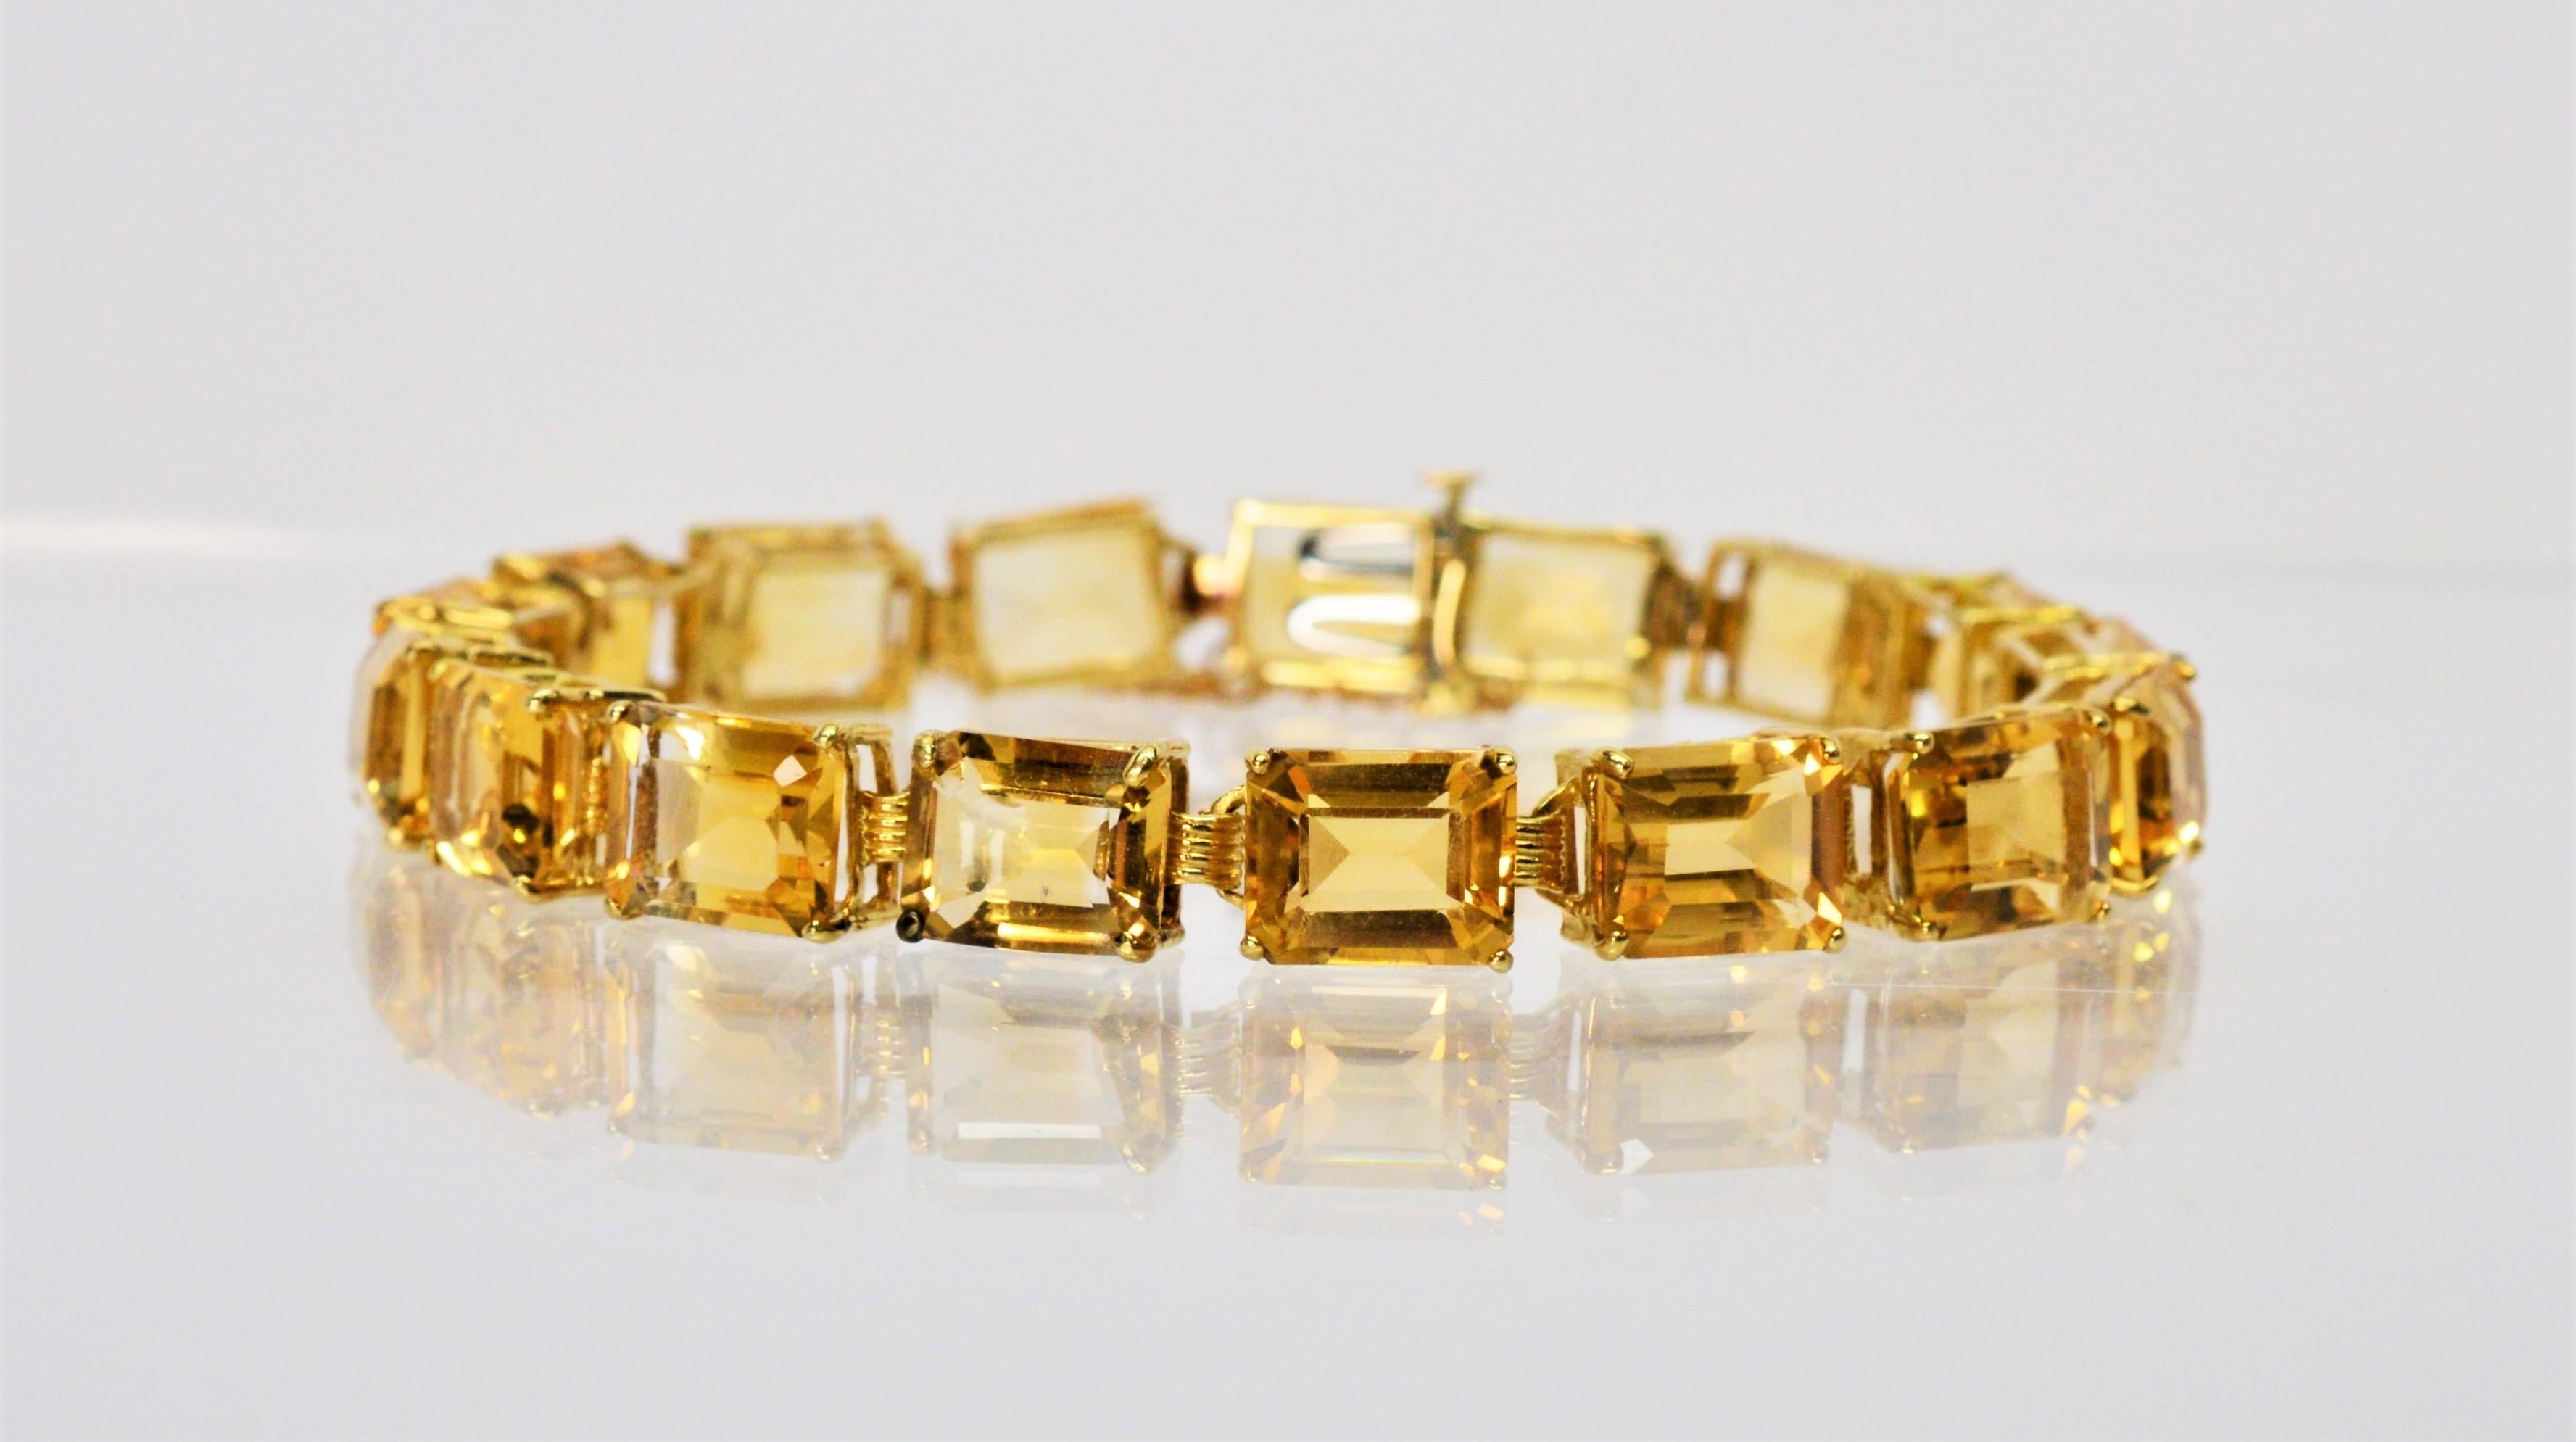 Representing the warmth of the sun and vitality of life, seventeen natural 8 x 10 mm emerald-cut natural citrine semi-precious gemstones for an approximately 49.3 carats total weight light up this brilliant 8.25 inch link bracelet set in fourteen